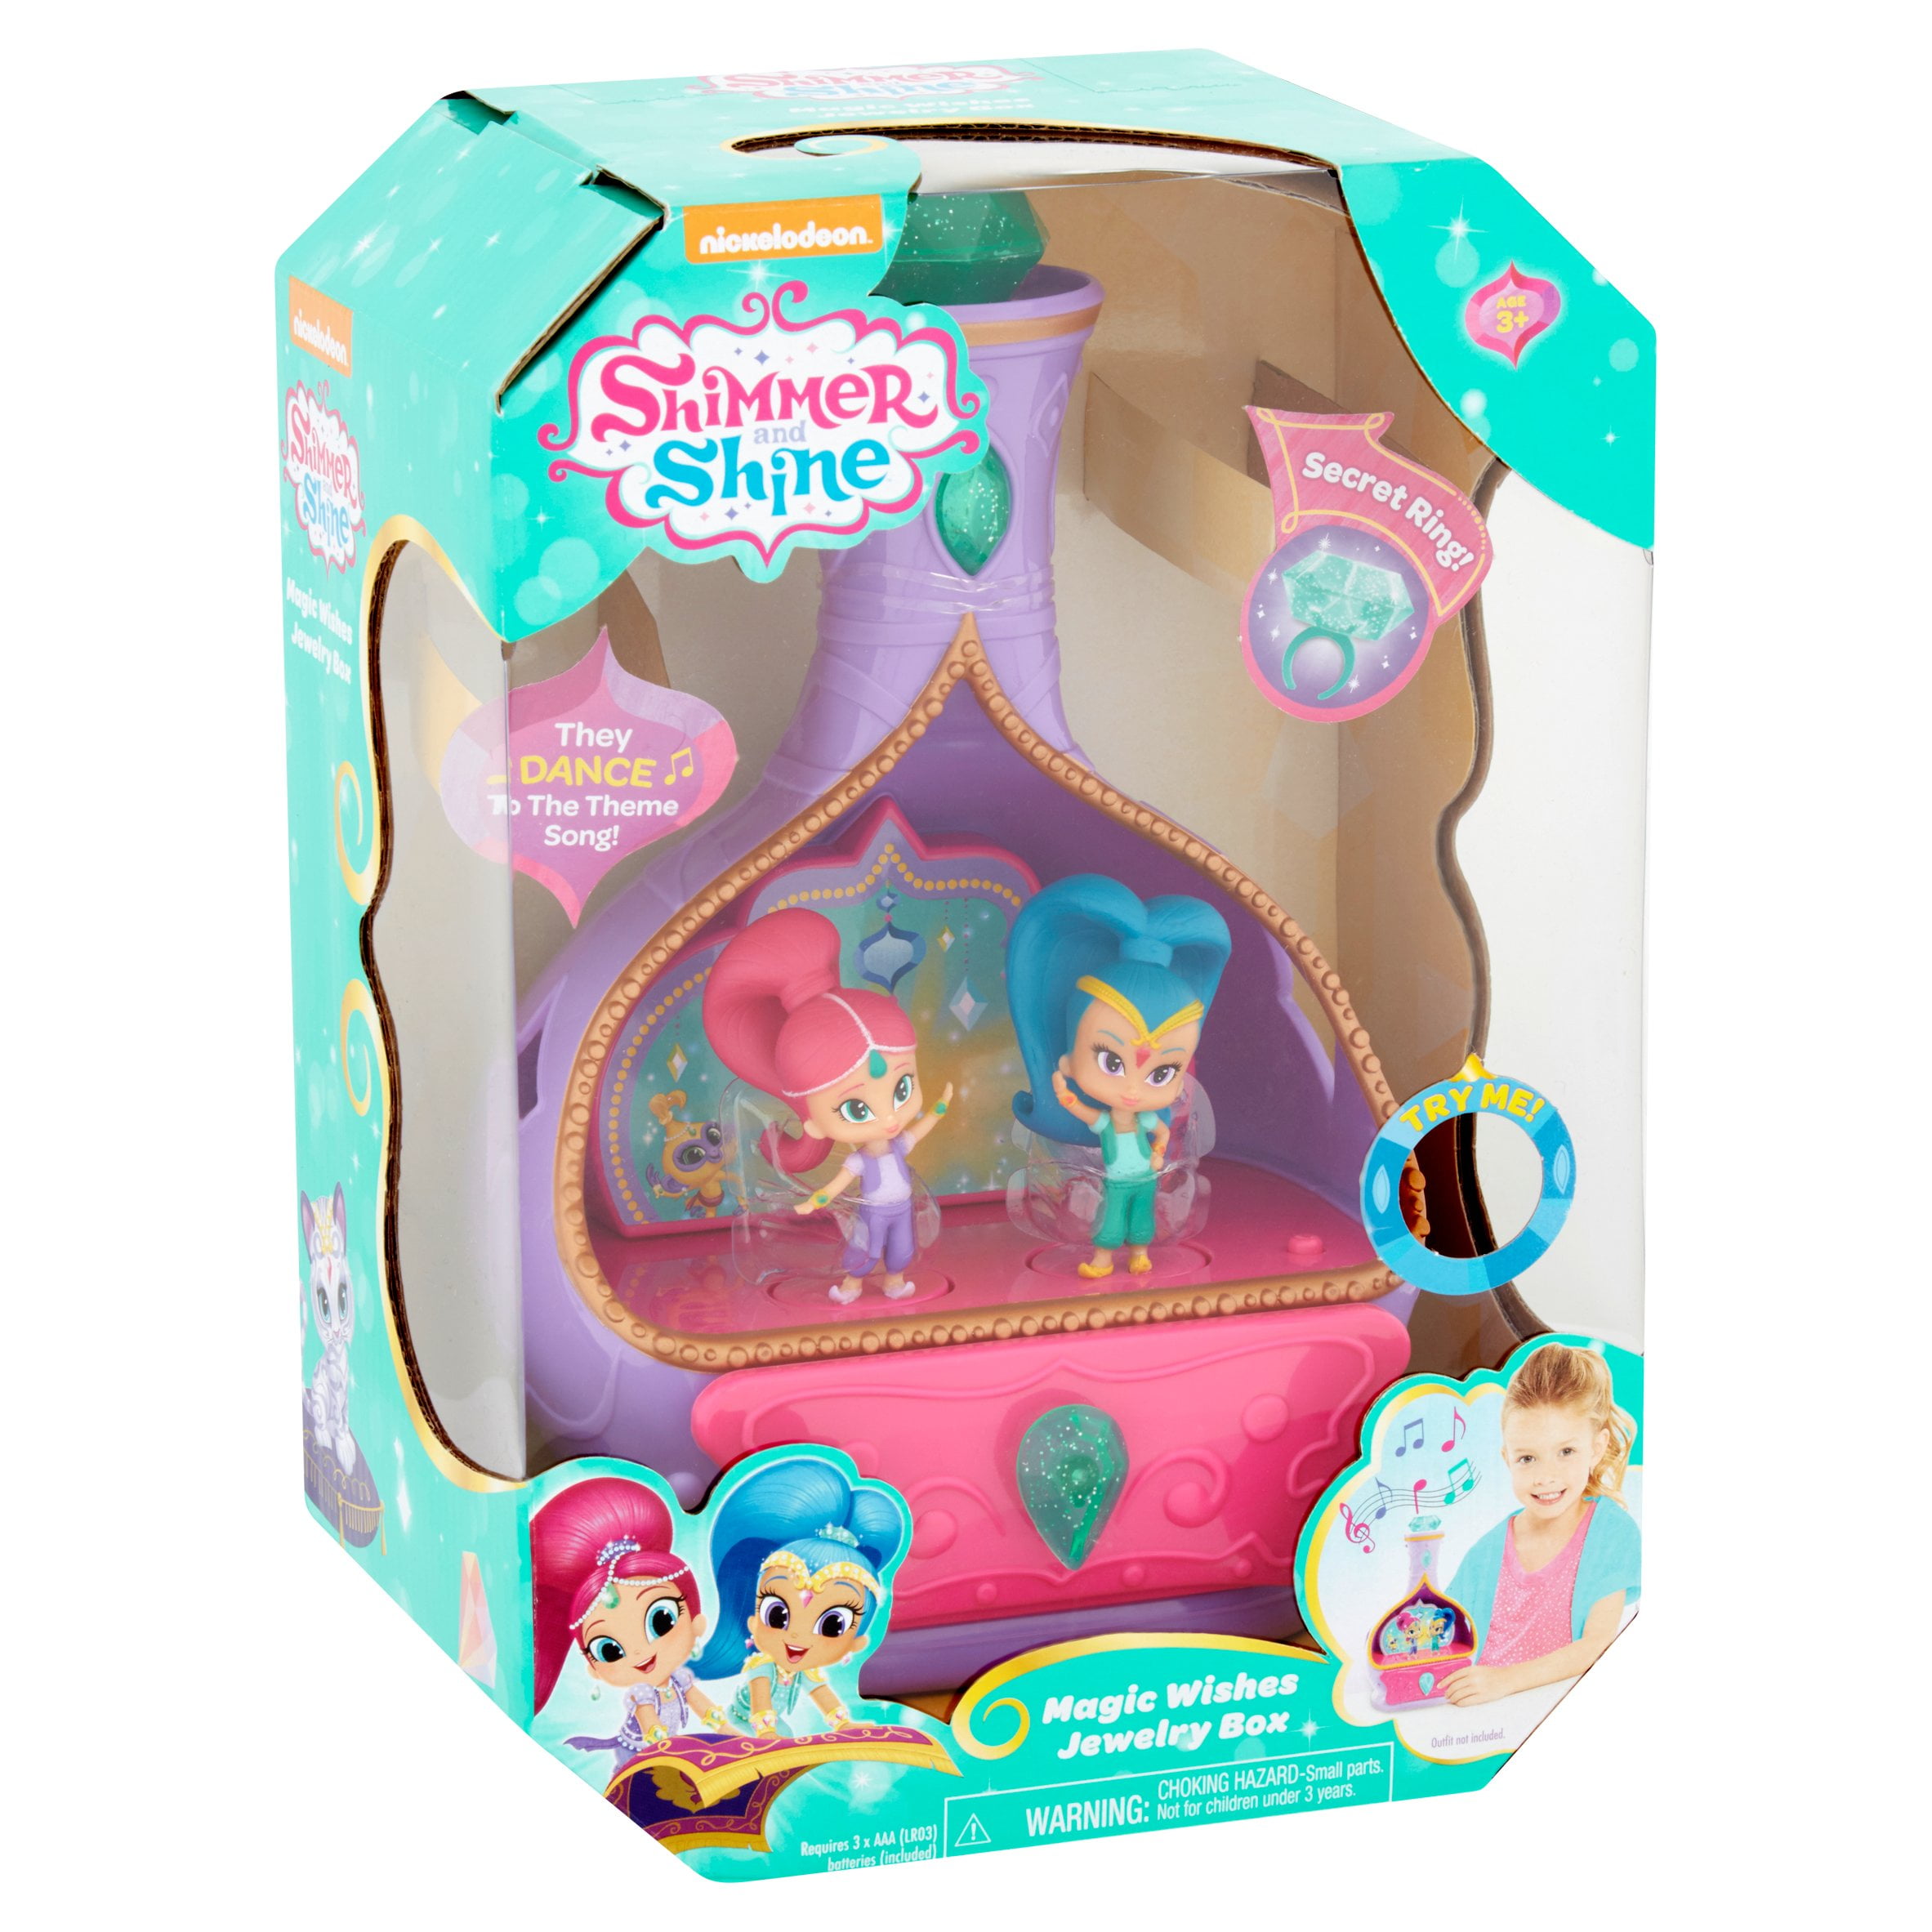 Shimmer and Shine Magic Wishes Jewelry Box Playset Song & Dance ss-1 